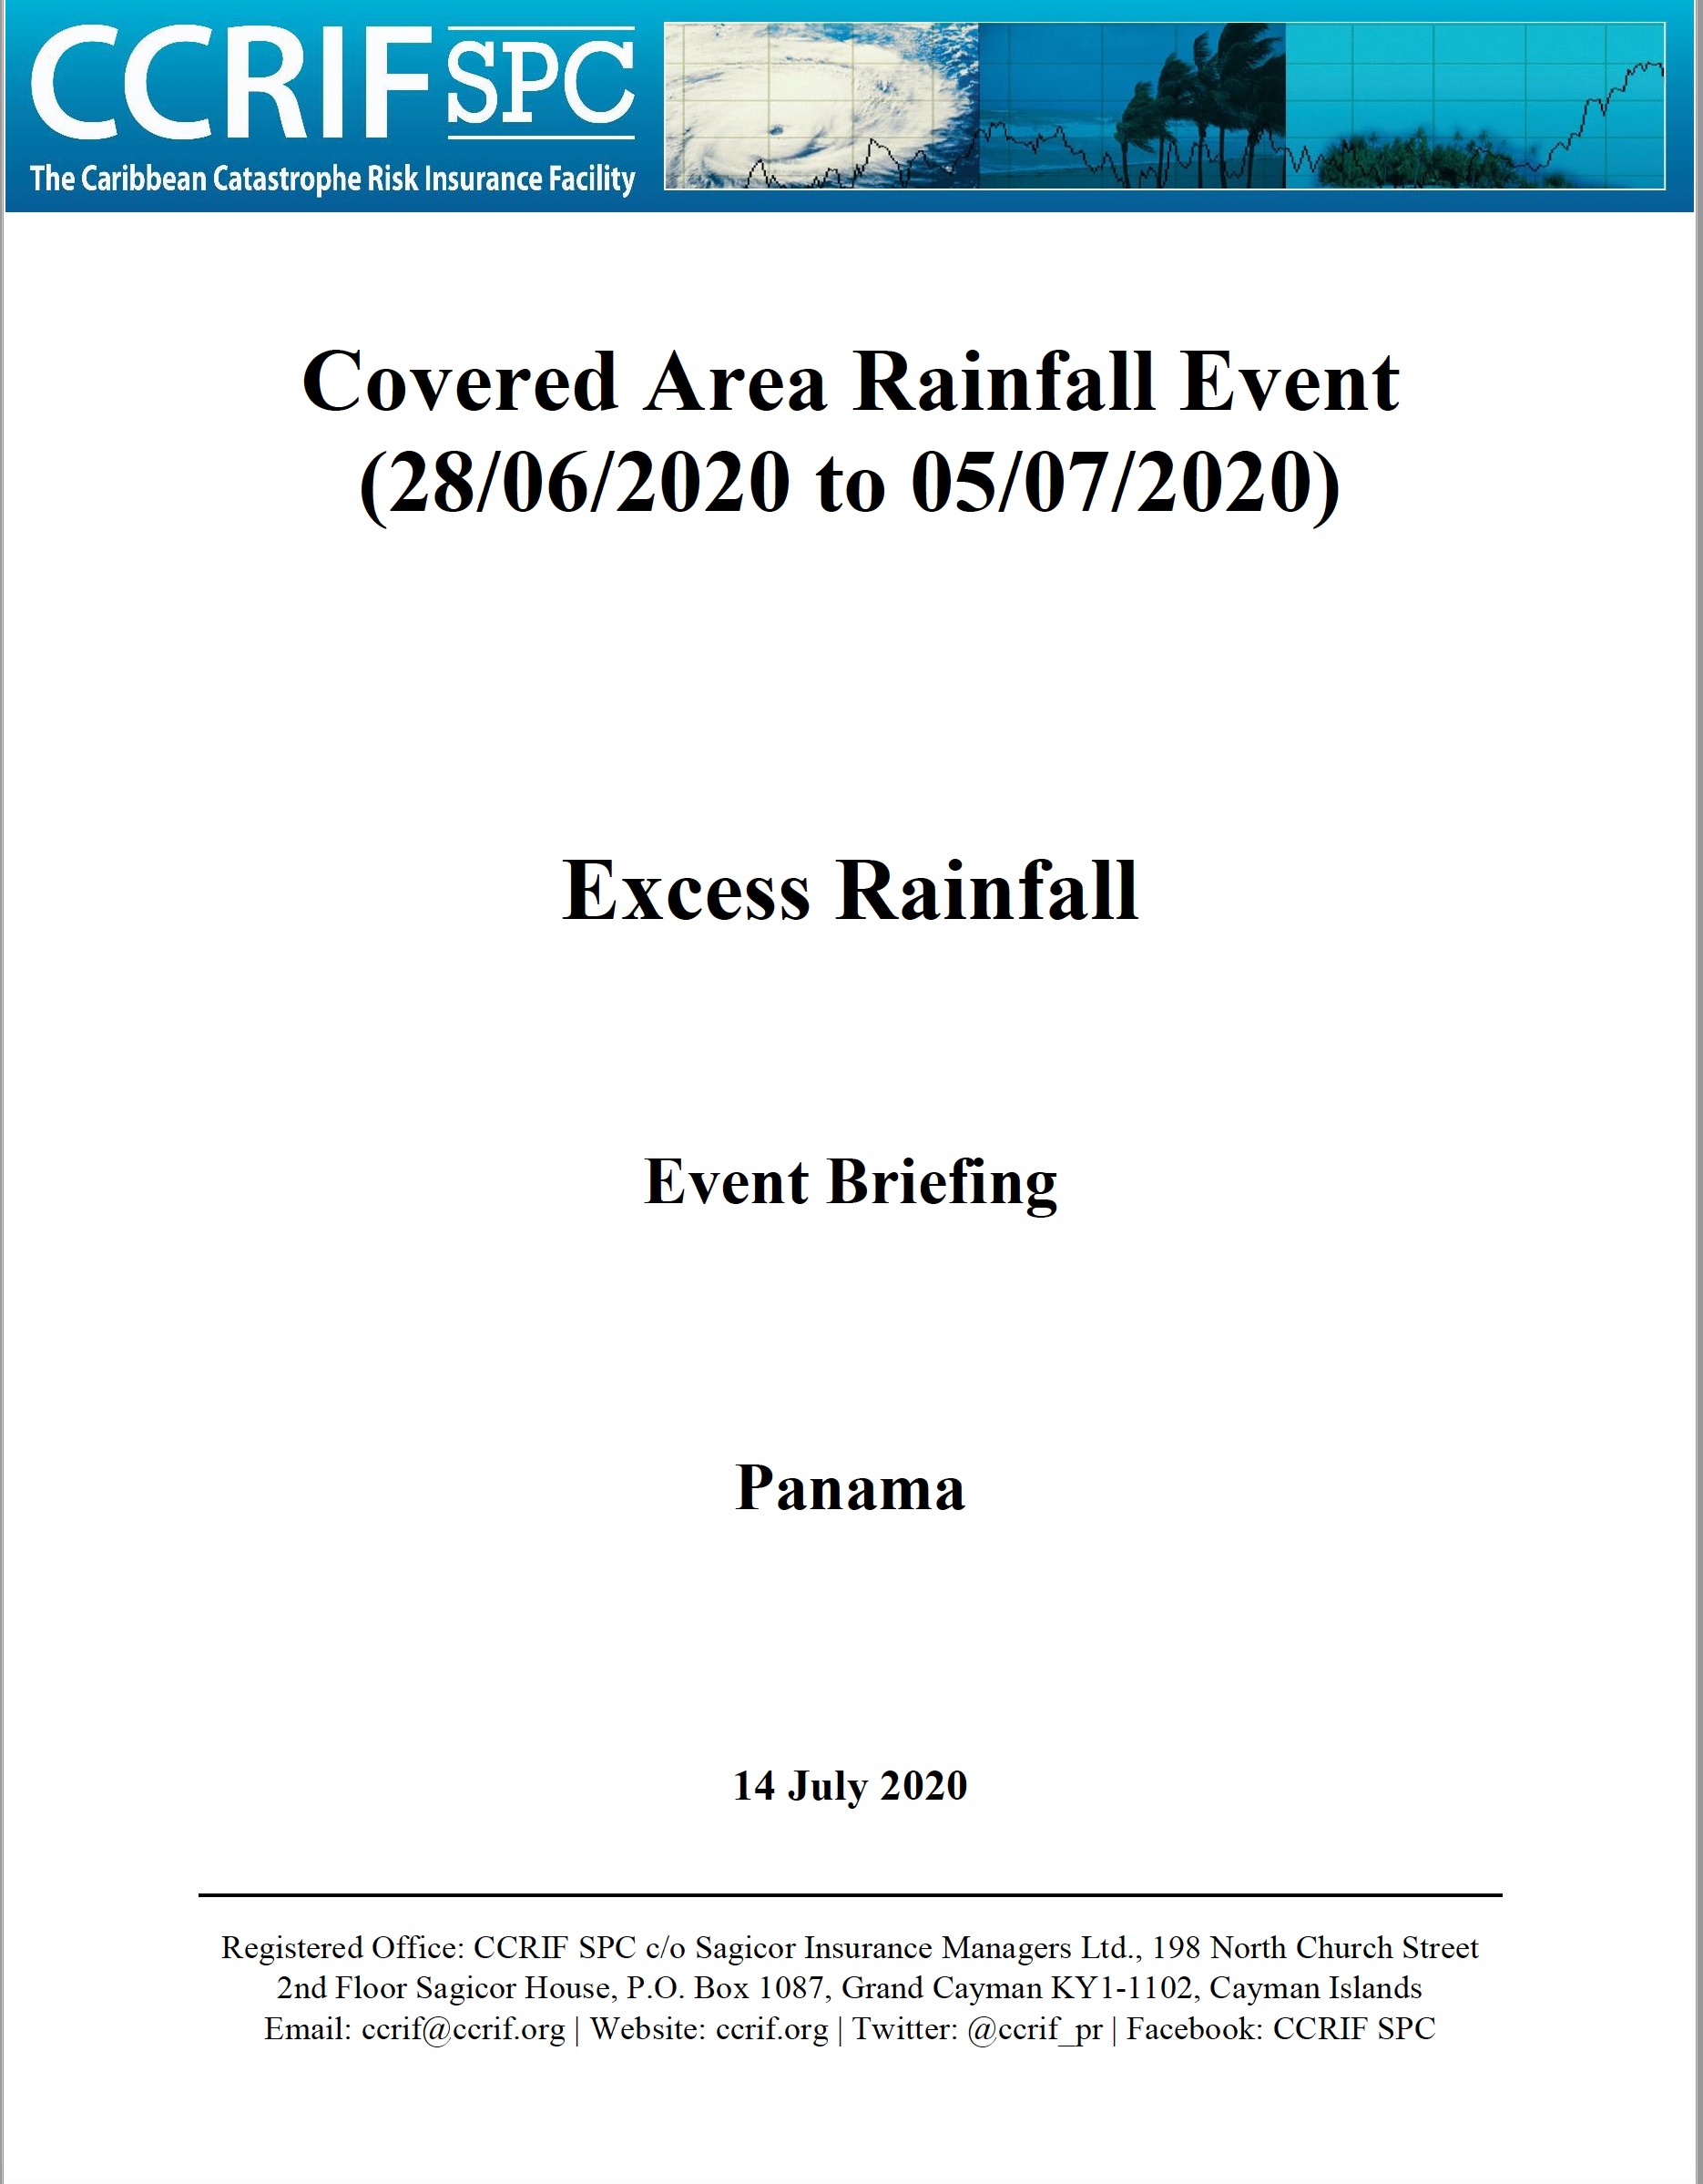 Event Briefing - Excess Rainfall - Covered Area Rainfall Event - Panama- July 14 2020